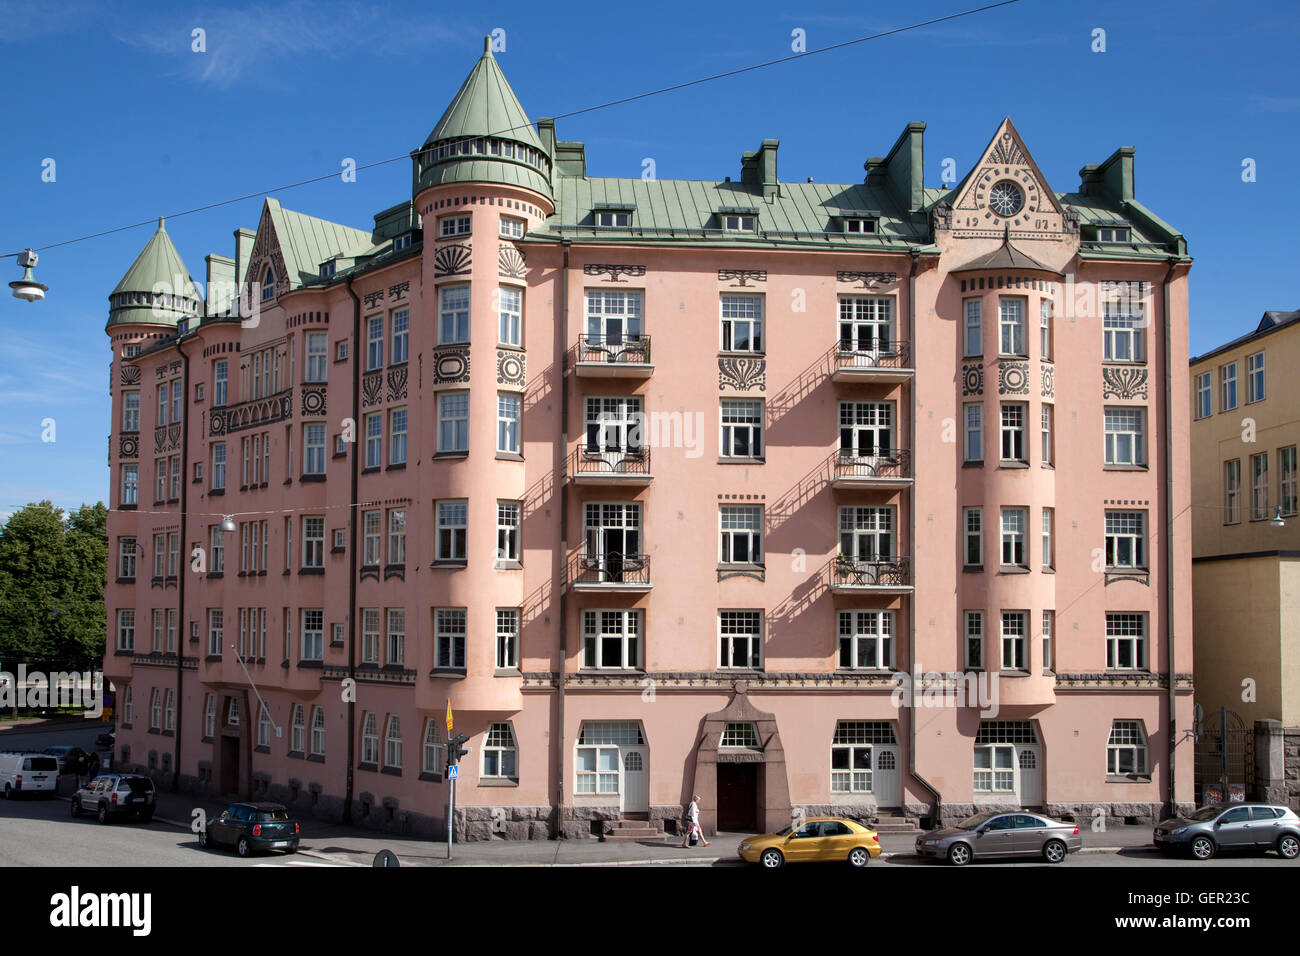 Ihantola, a jugend style building in Helsinki, Finland, designed by O. E. Koskinen and built in 1905–1907. Stock Photo